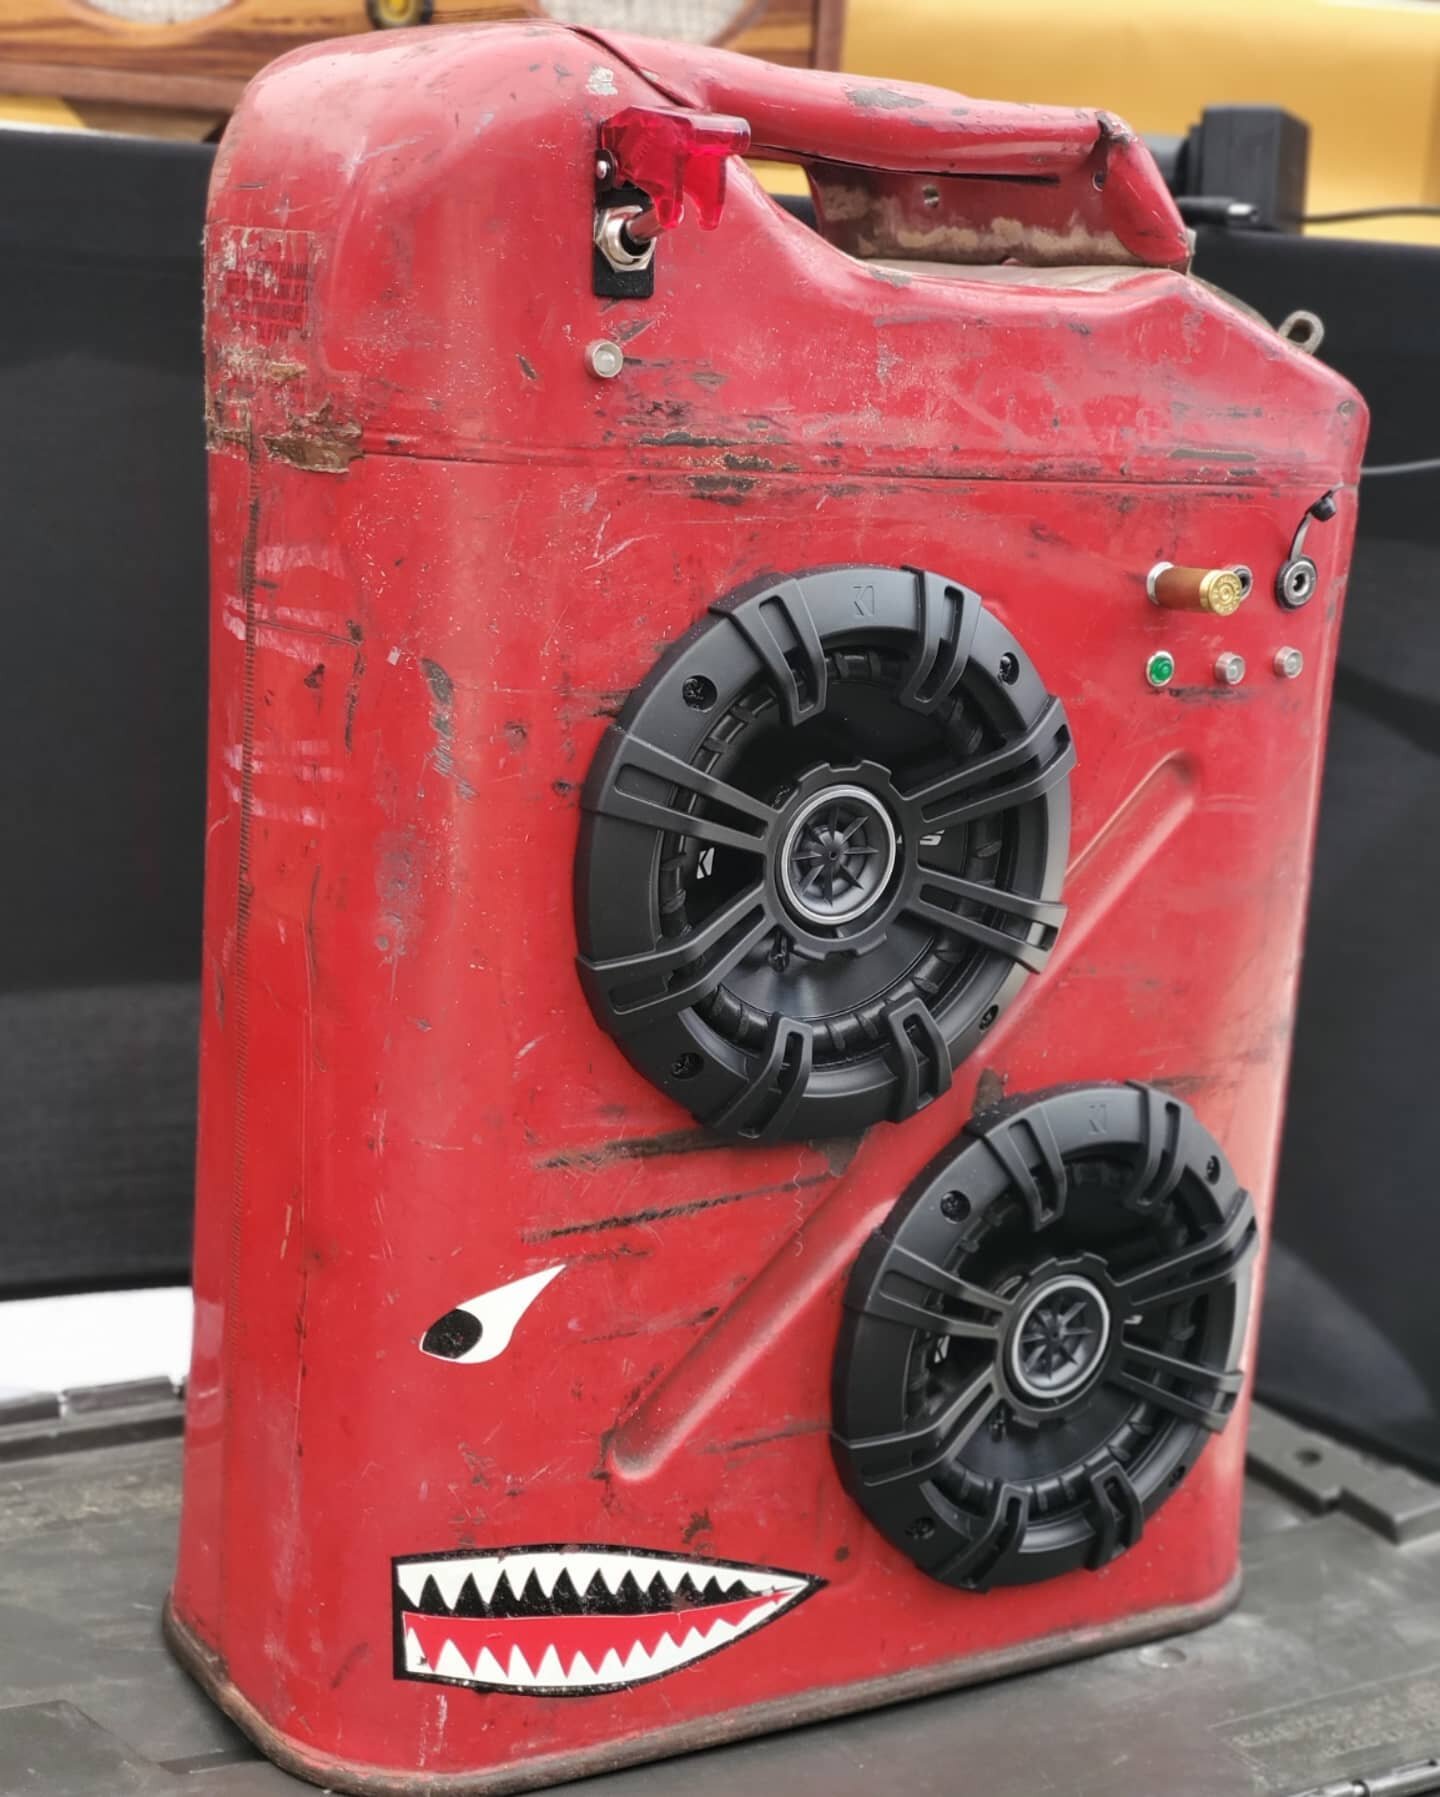 Another new Jerry can speaker off to a new home today. I really like making these and repurposing cool stuff. #tinkeraudio #custom #bluetooth #speaker #handmade #unique #oneofakind #upcycle #repurpurposed #veteranmade #veteranartist #Veteran #voctrib